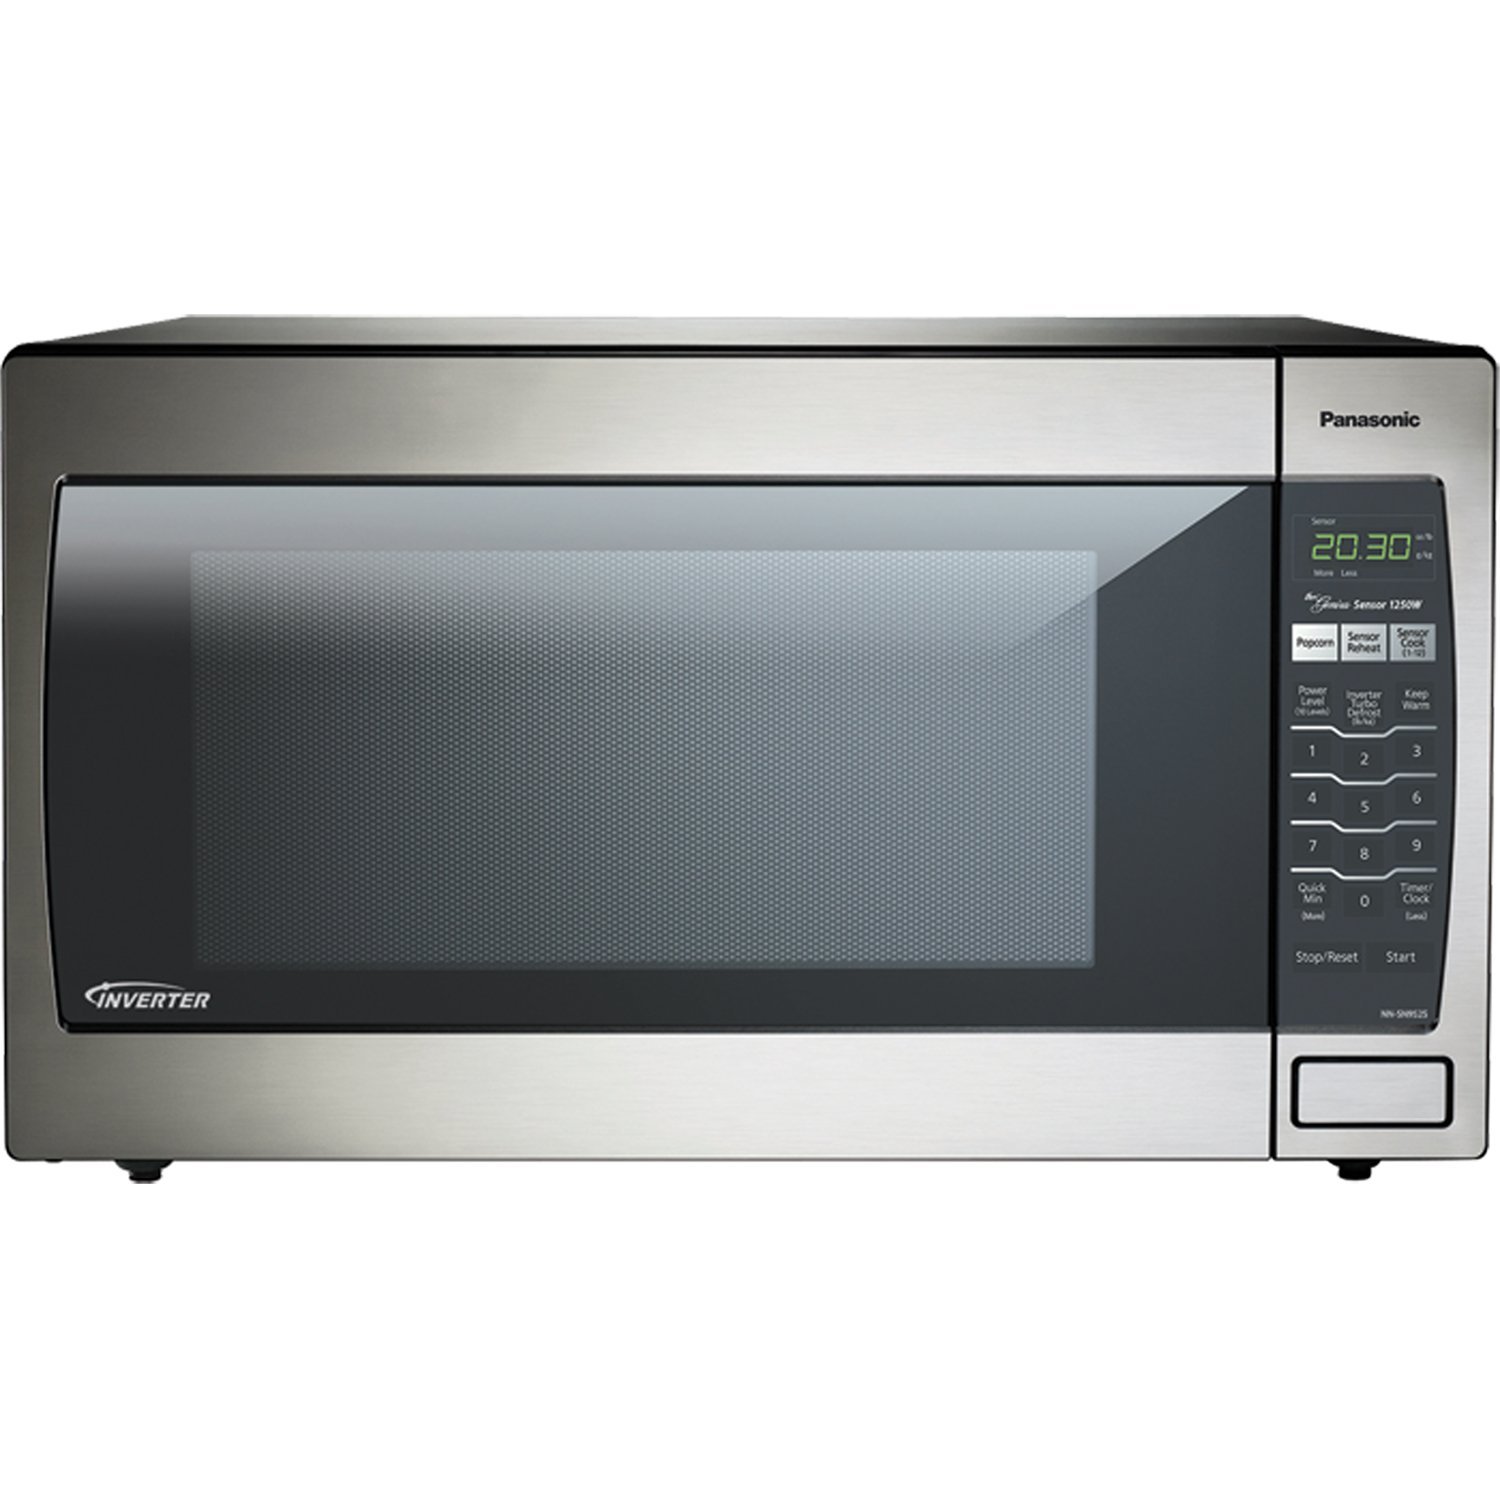 Panasonic NN-SN952S Stainless 1250W 2.2 Cu. Ft. Countertop Microwave Oven with Inverter Technology